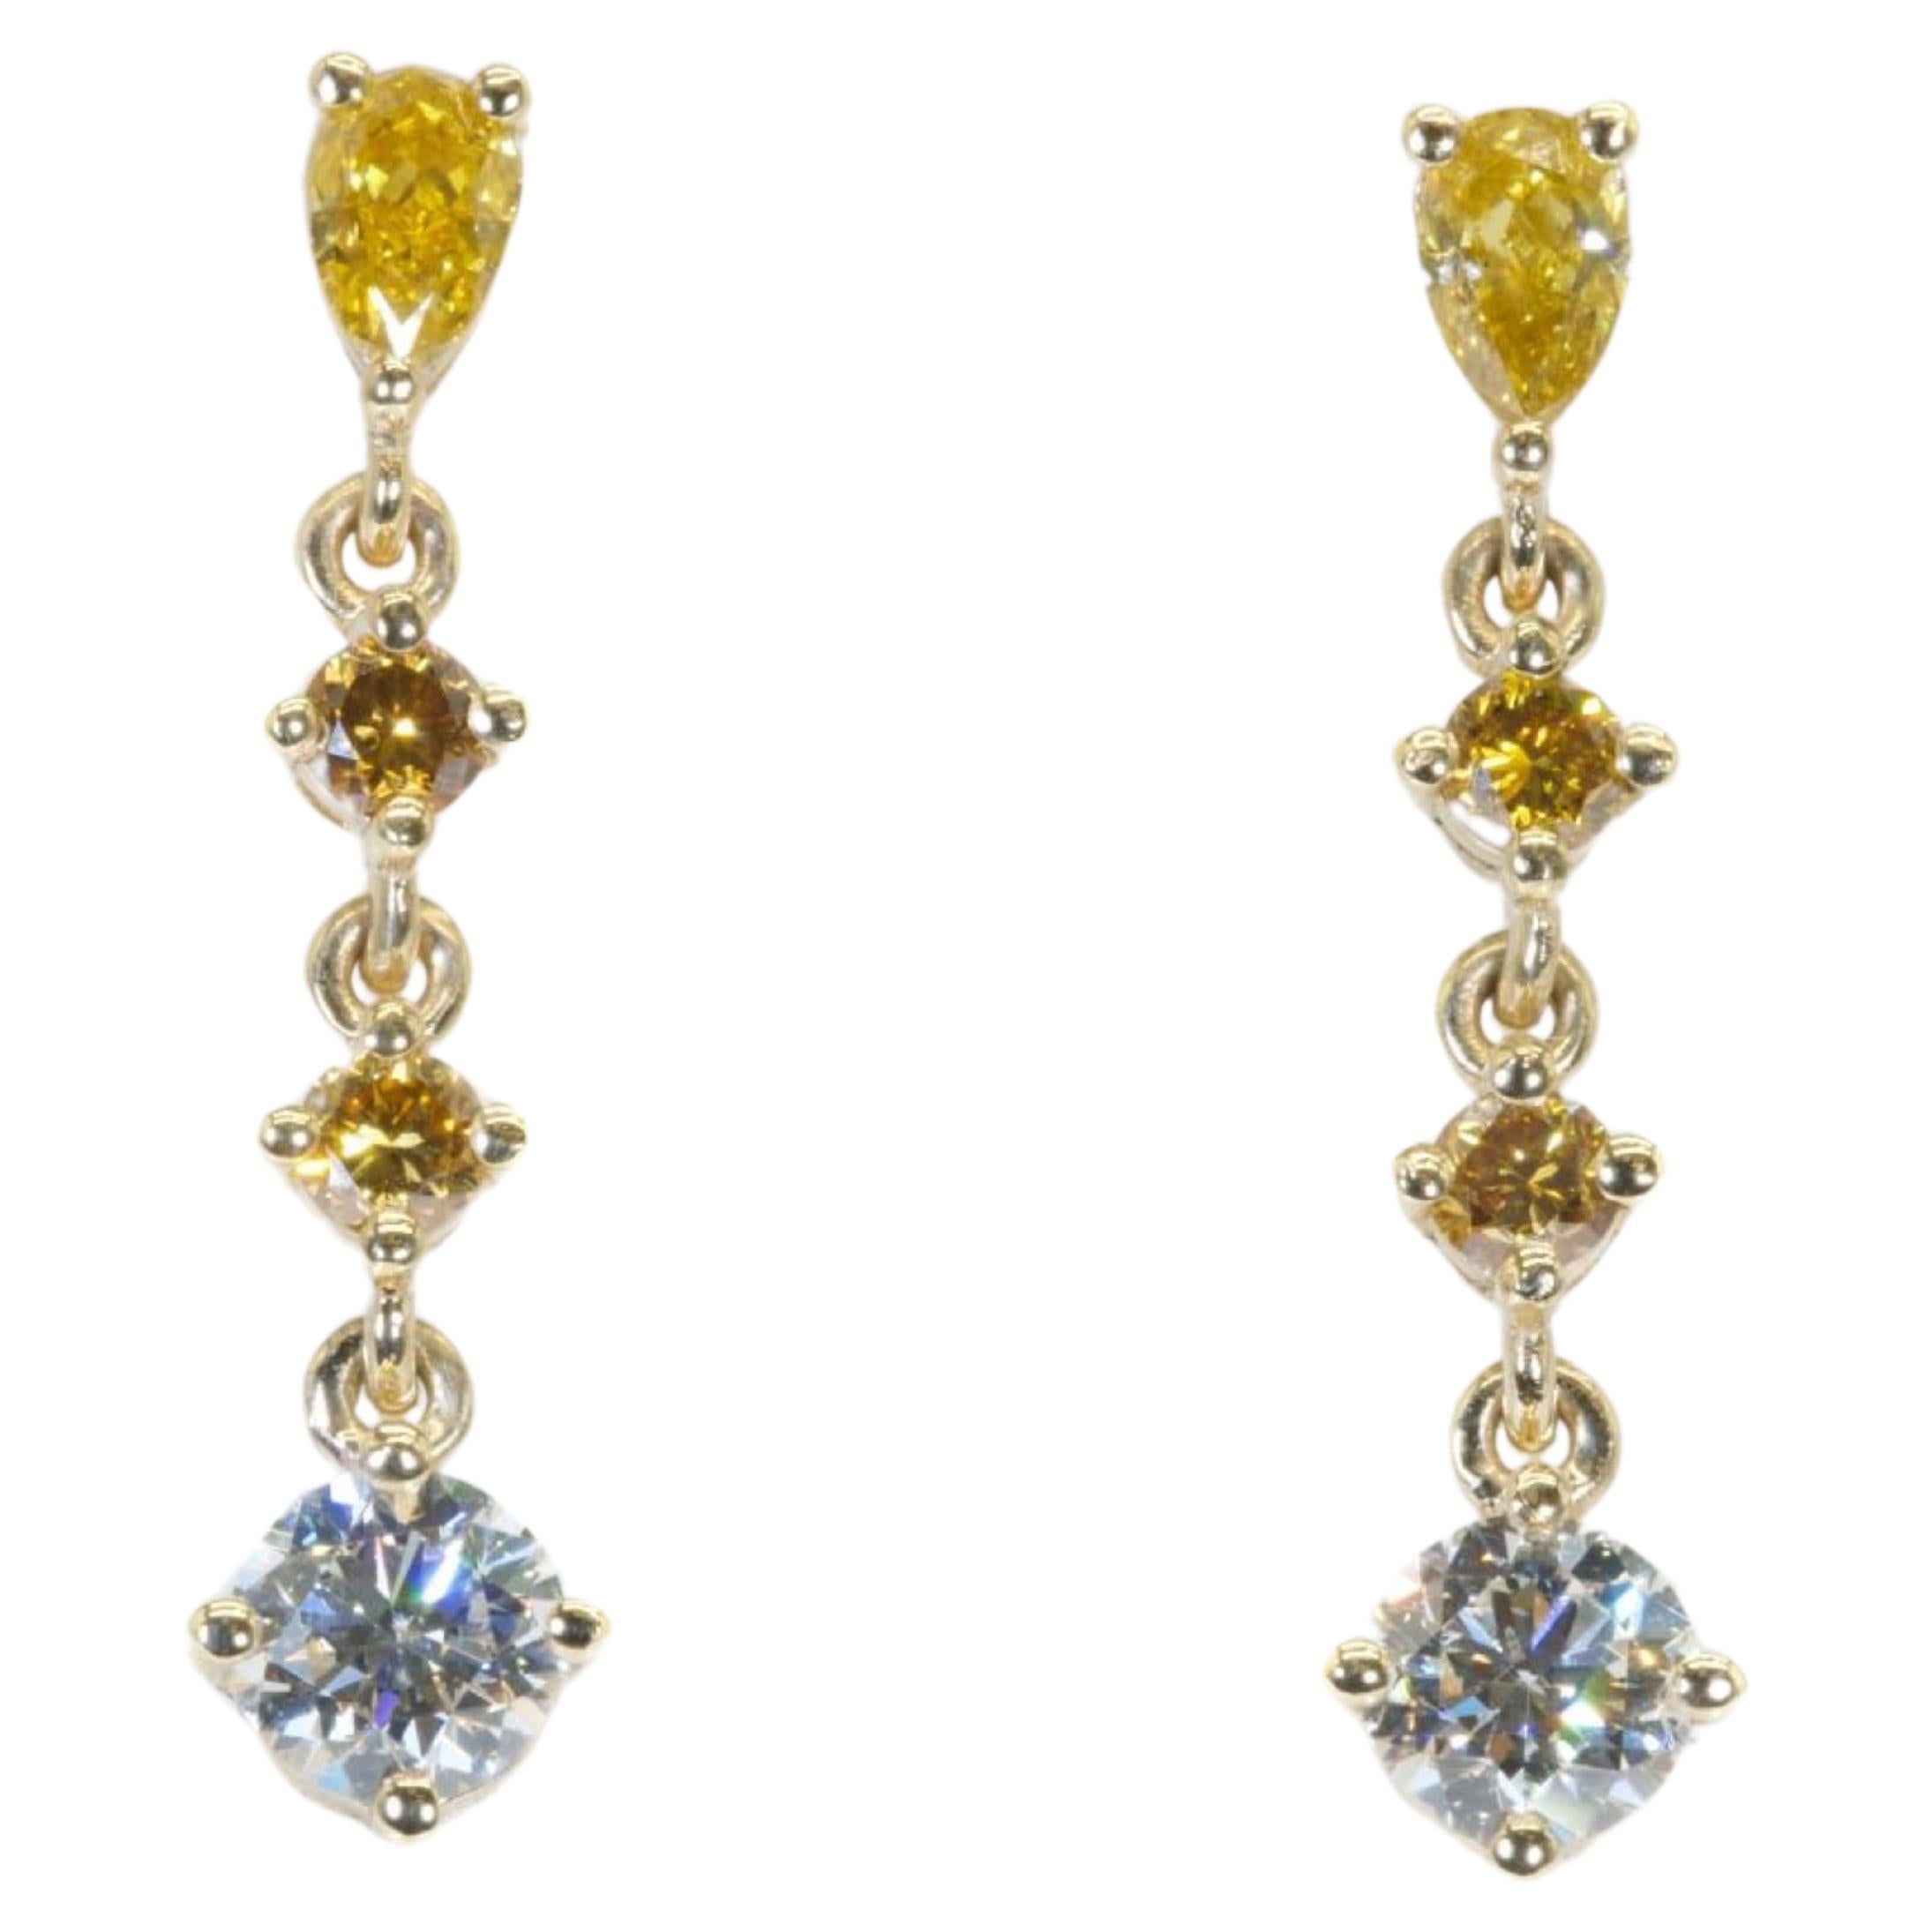 Glamorous 1.56ct. Mix Shapes Dangling Diamond Earrings  For Sale